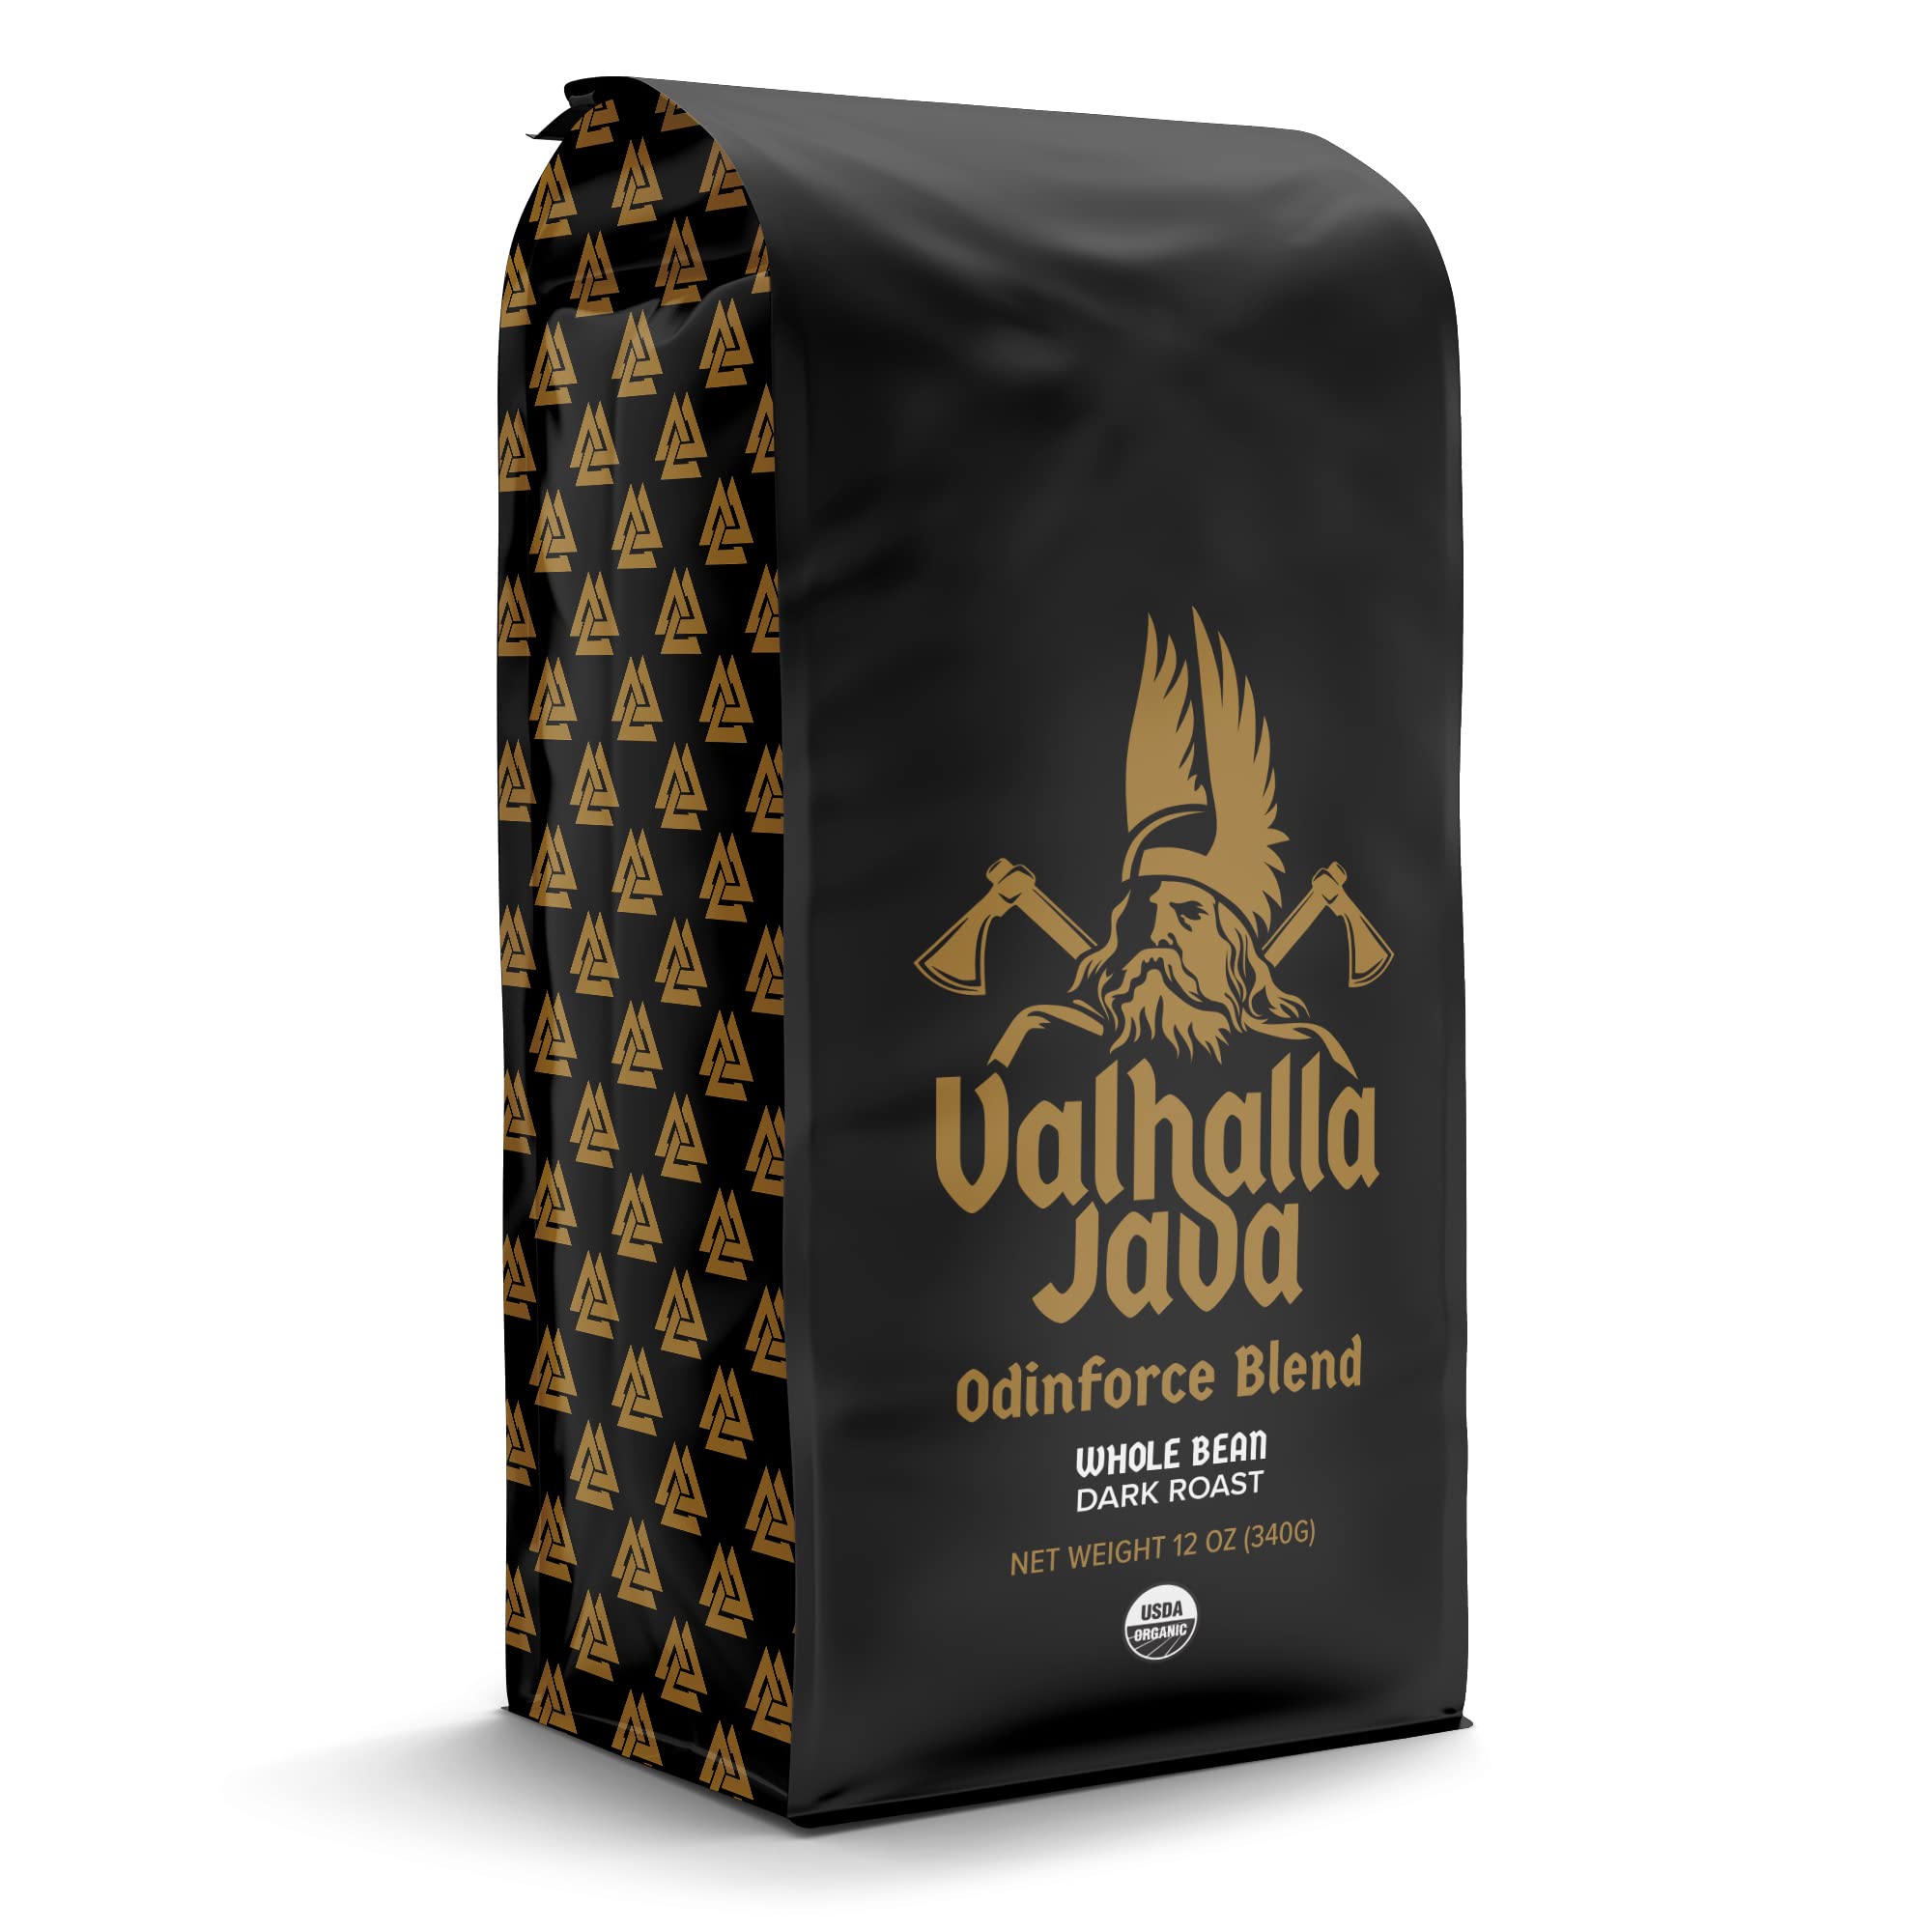 Death Wish Coffee Co. Valhalla Java Odinforce Blend - Whole Bean Dark Roast - Extra Kick of Caffeine - Arabica & Robusta Coffee Beans - Dark Roast Coffee Beans 12 Ounce (Pack of 1)